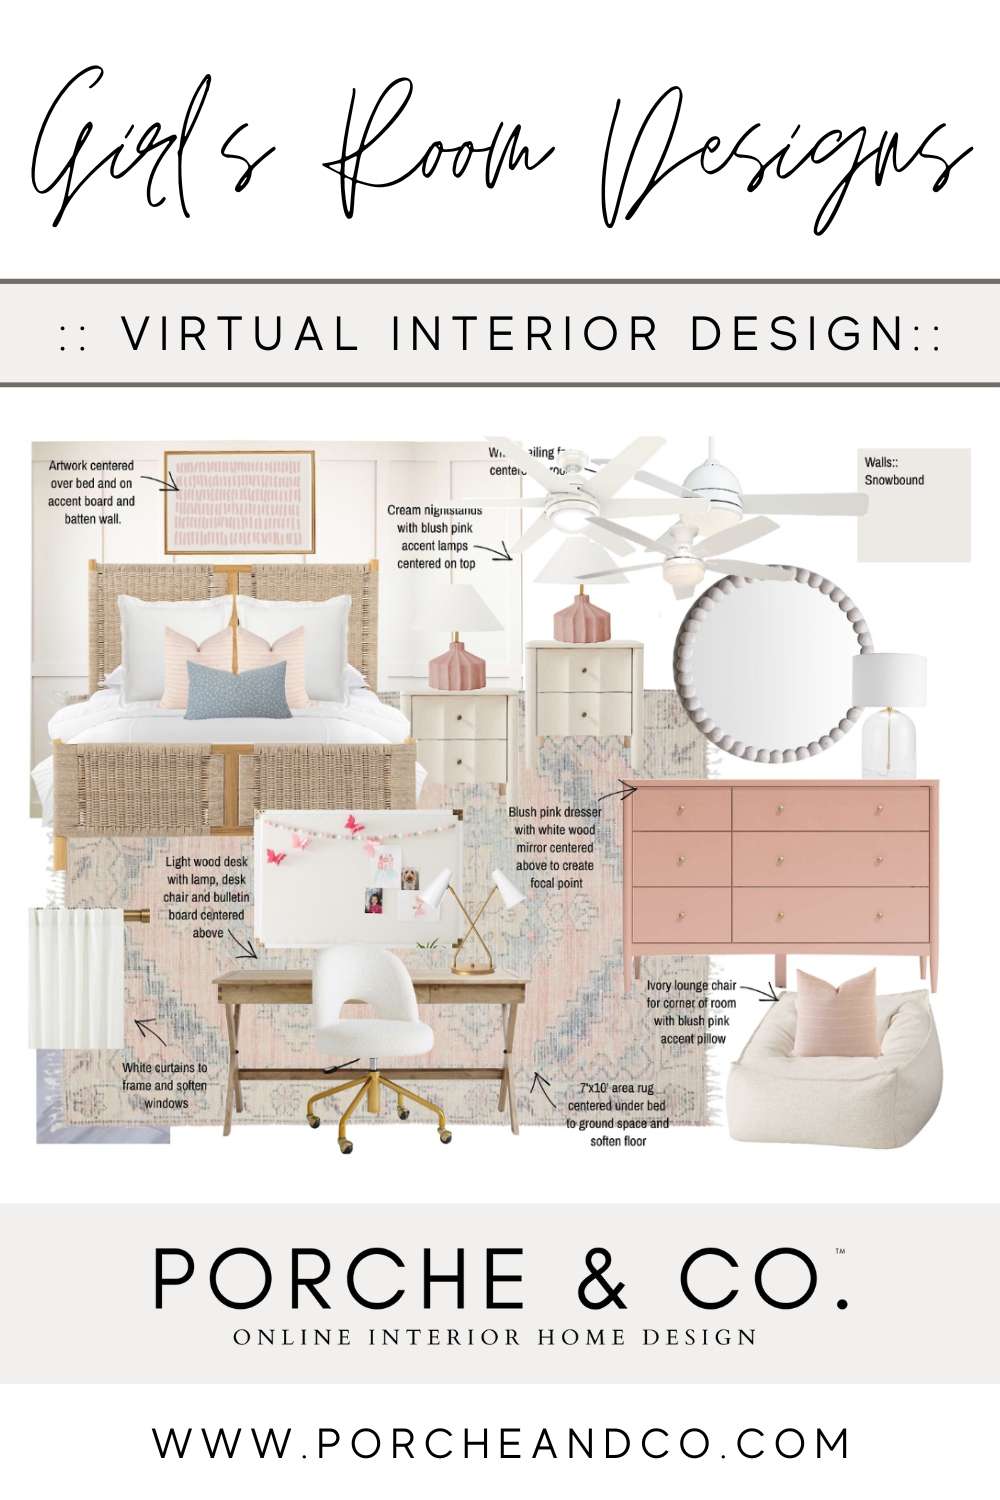 Designs of the Week :: Modern Classic Girl's Bedroom Designs — Porche & Co.